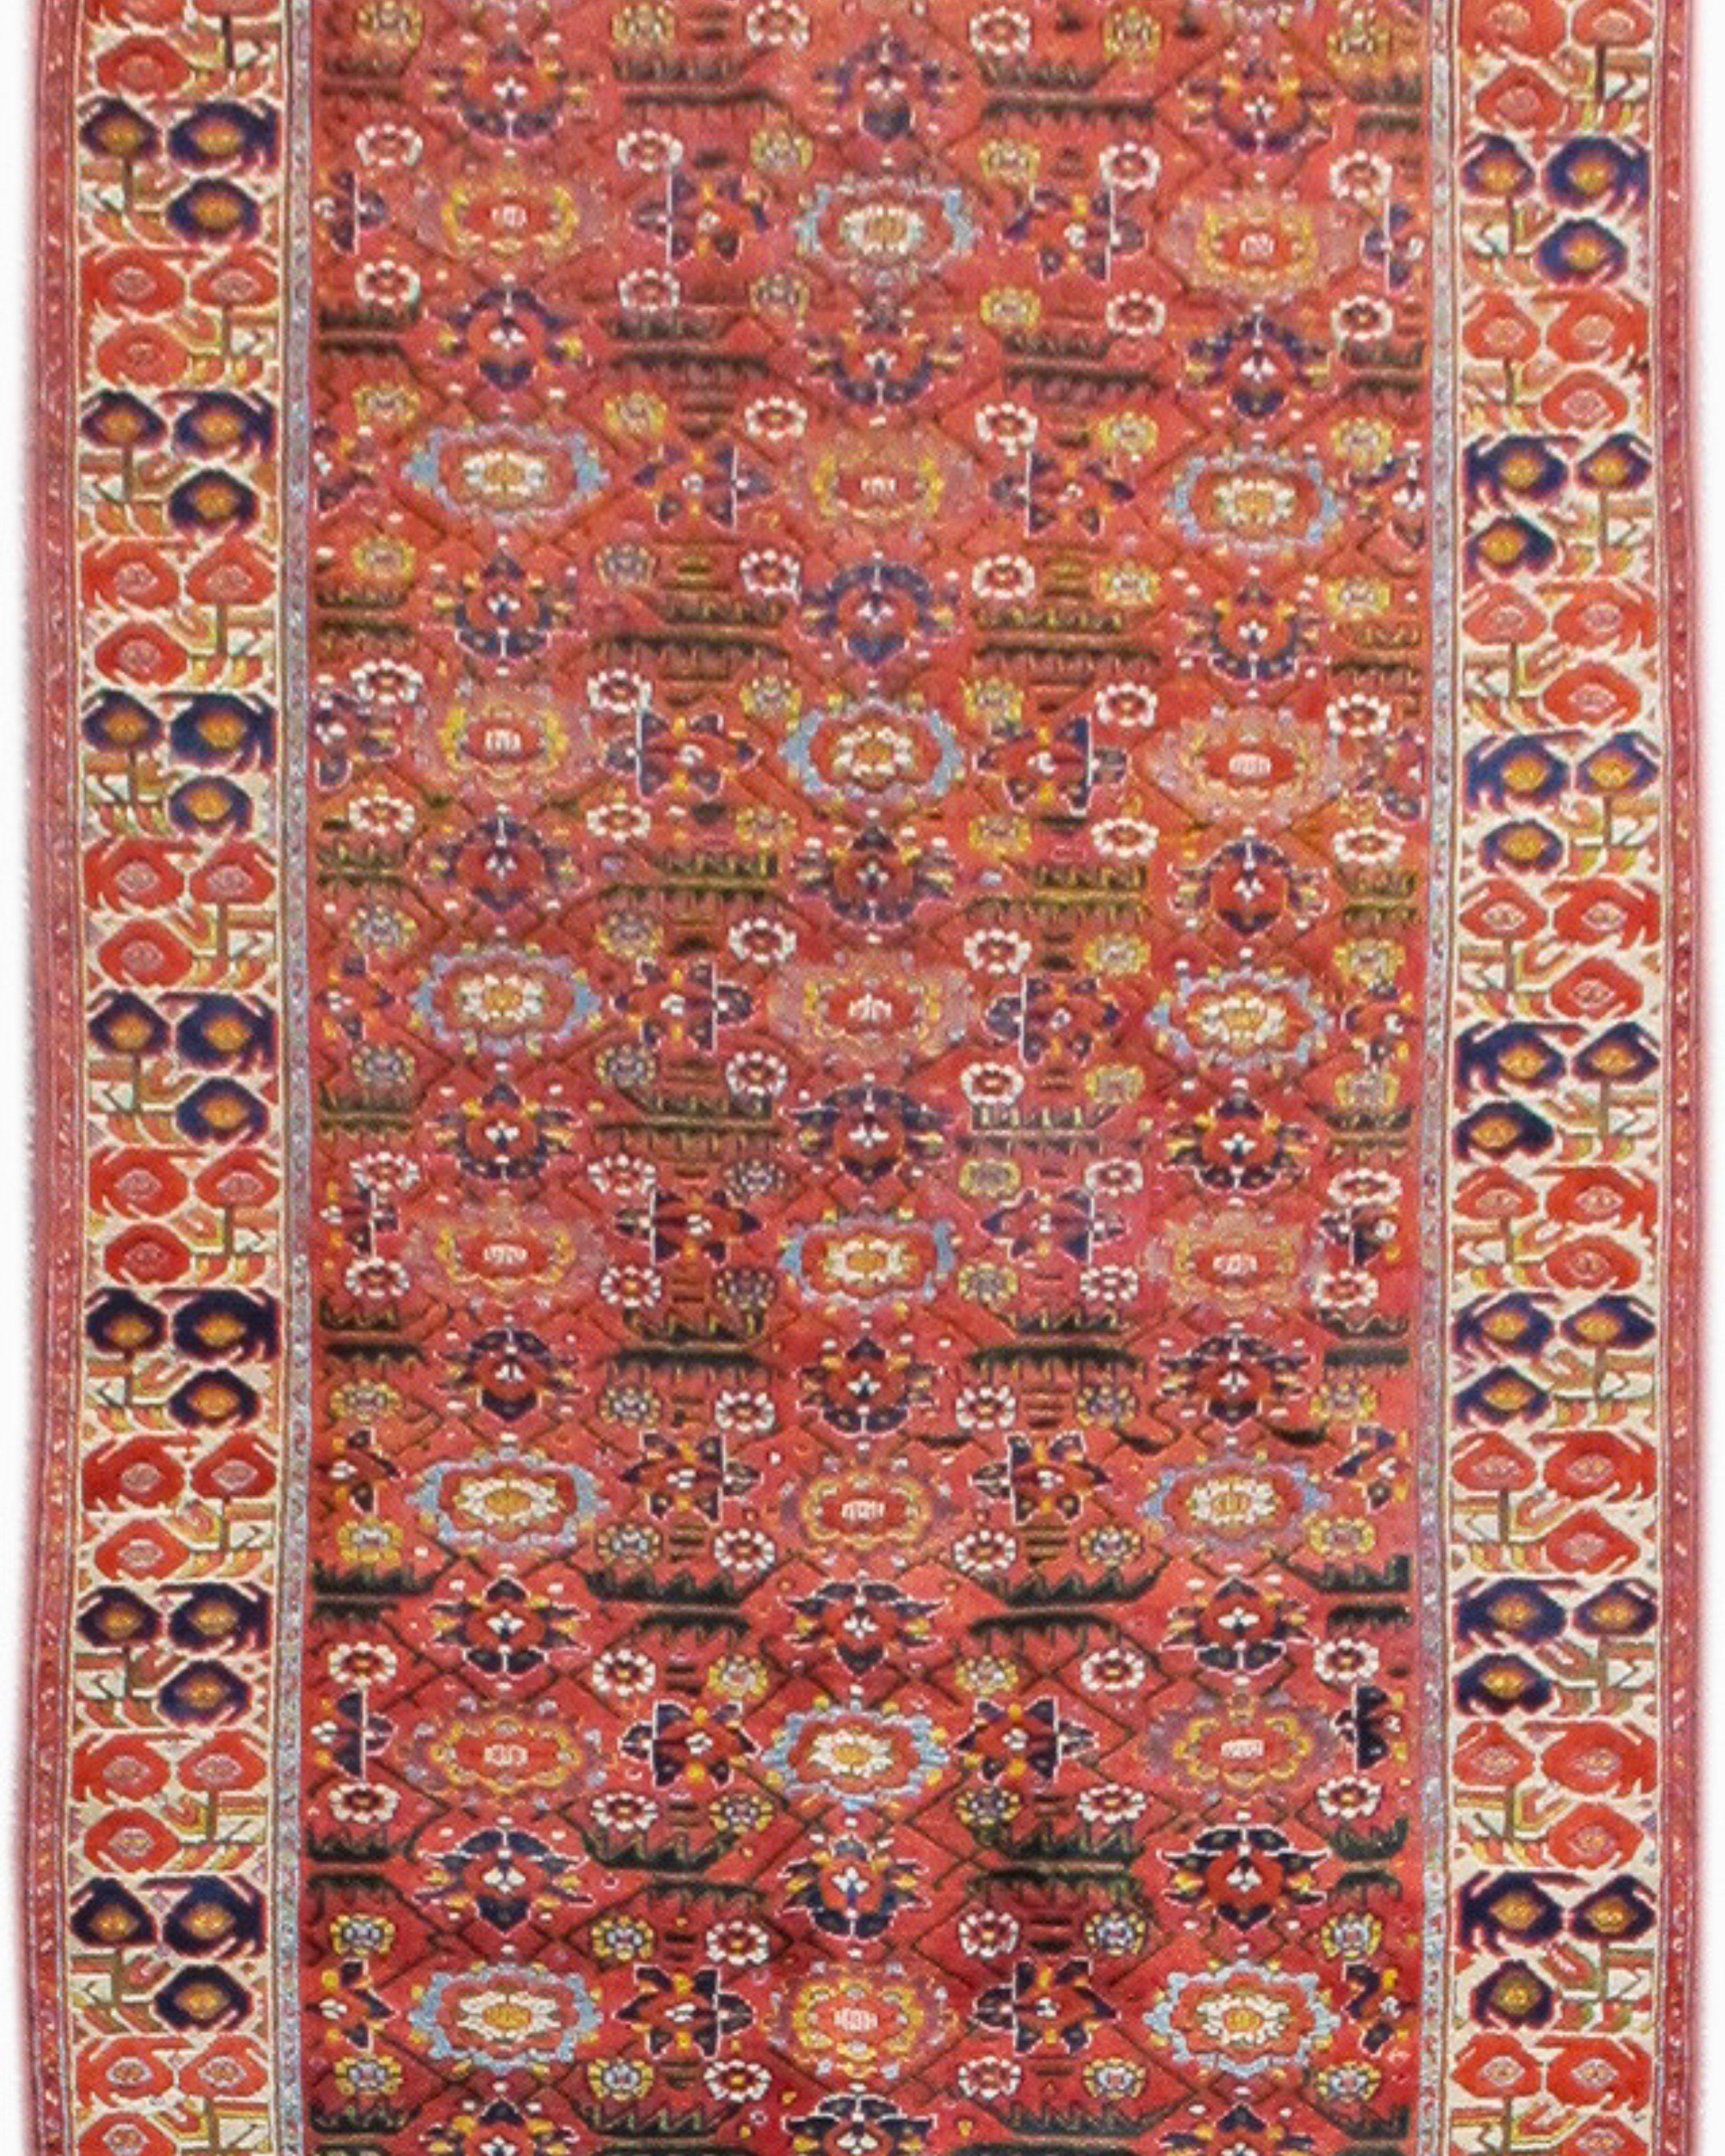 Antique Northwest Persian Long Rug, c. 1900 In Excellent Condition For Sale In San Francisco, CA